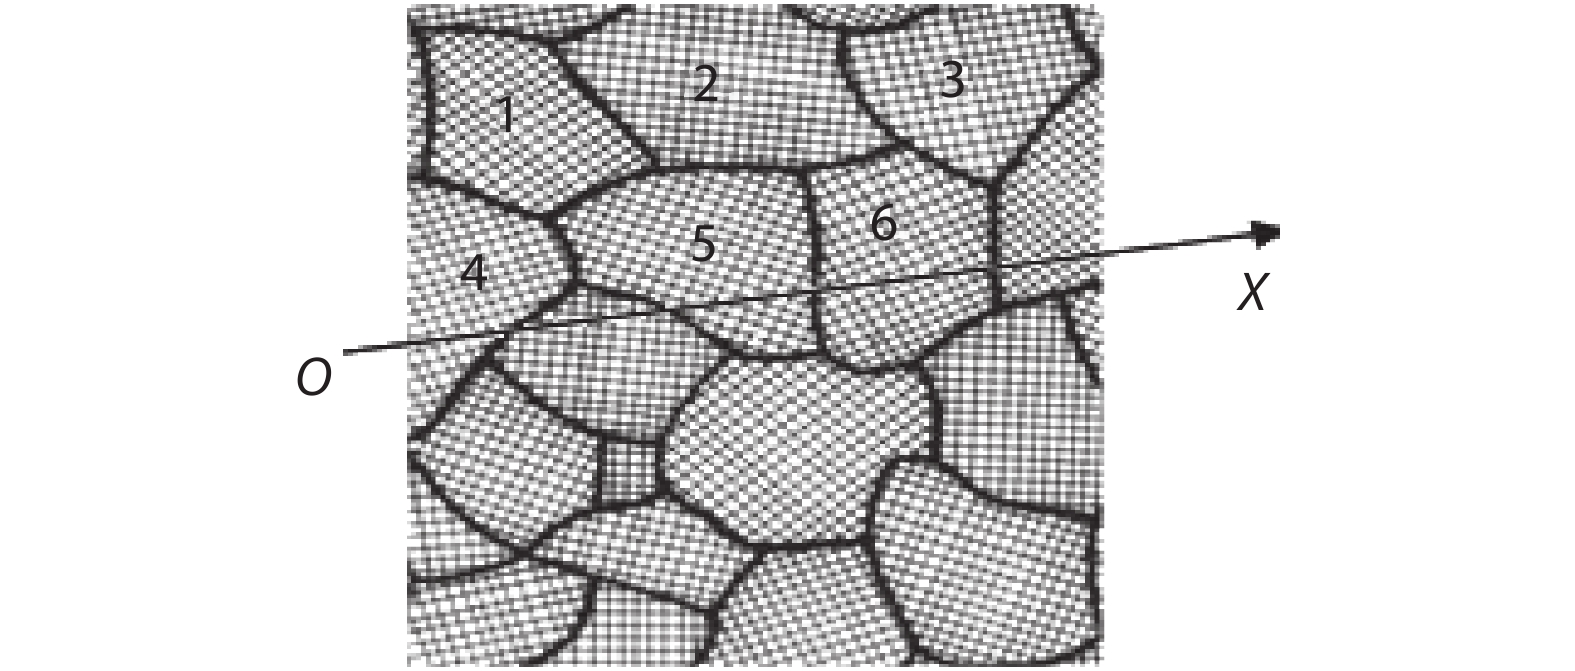 Microstructure of the surface of a polycrystalline metal.